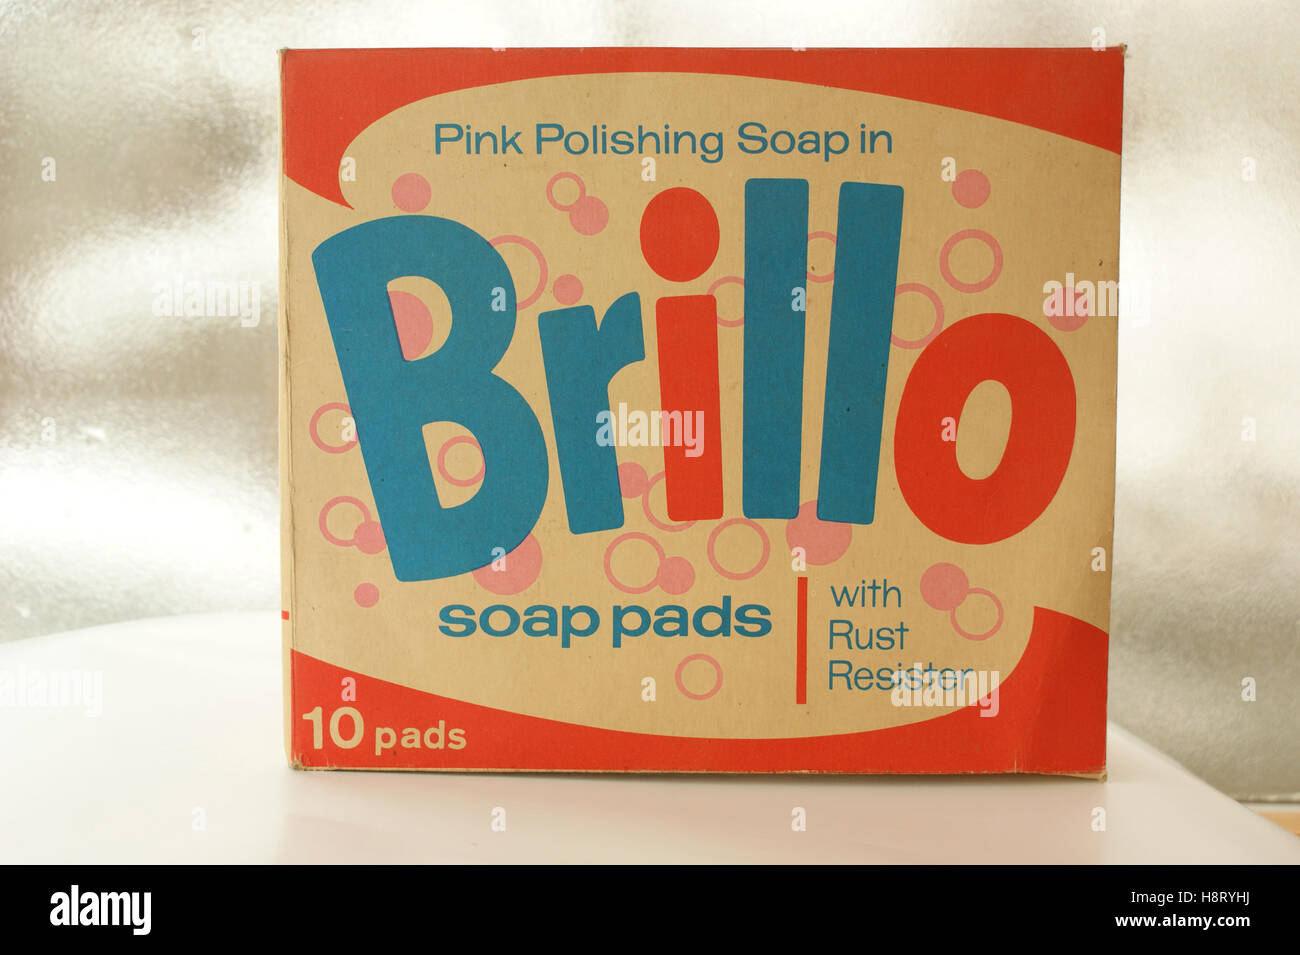 An advert for a box of Brillo steel wool cleaning pads. It appeared in a  magazine published in the UK in 1959. Brillo Pad is a trade name for a scouring  pad